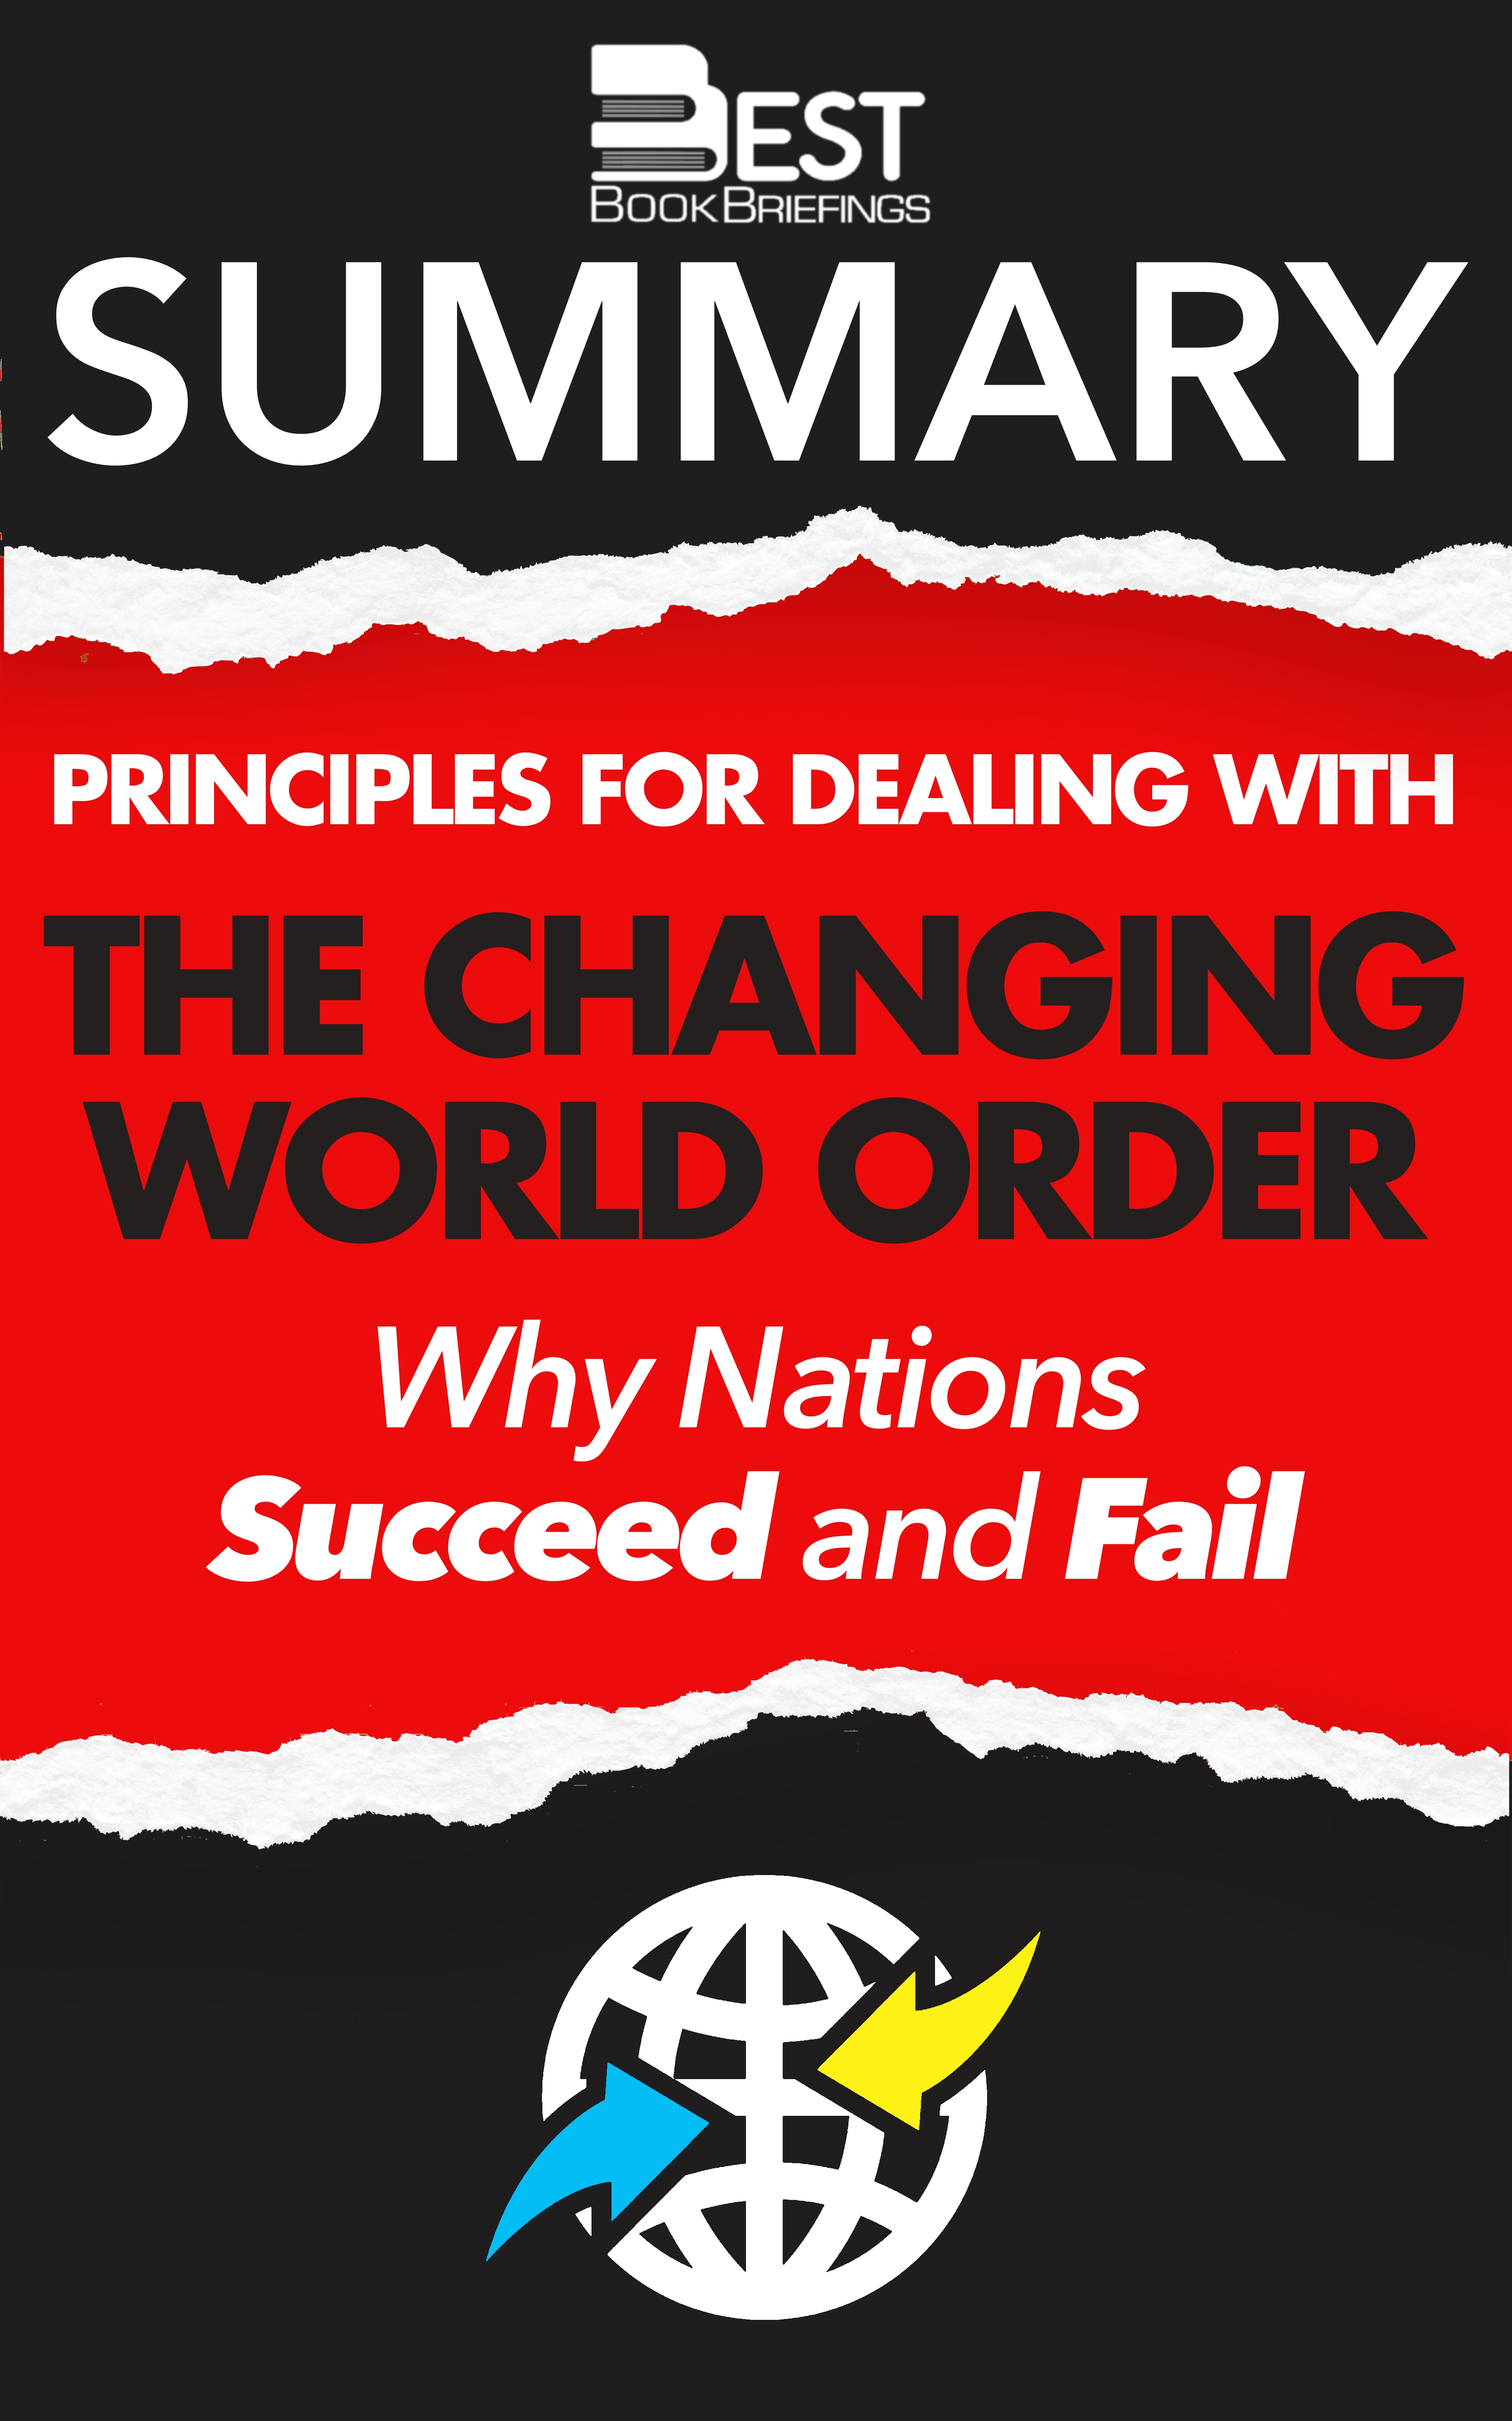 Through his book Principles for Dealing with the Changing World Order, Dalio brings readers along for his study of the major empires—including the Dutch, the British, and the American—putting into perspective the “Big Cycle” that has driven the successes and failures of all the world’s major countries throughout history.  